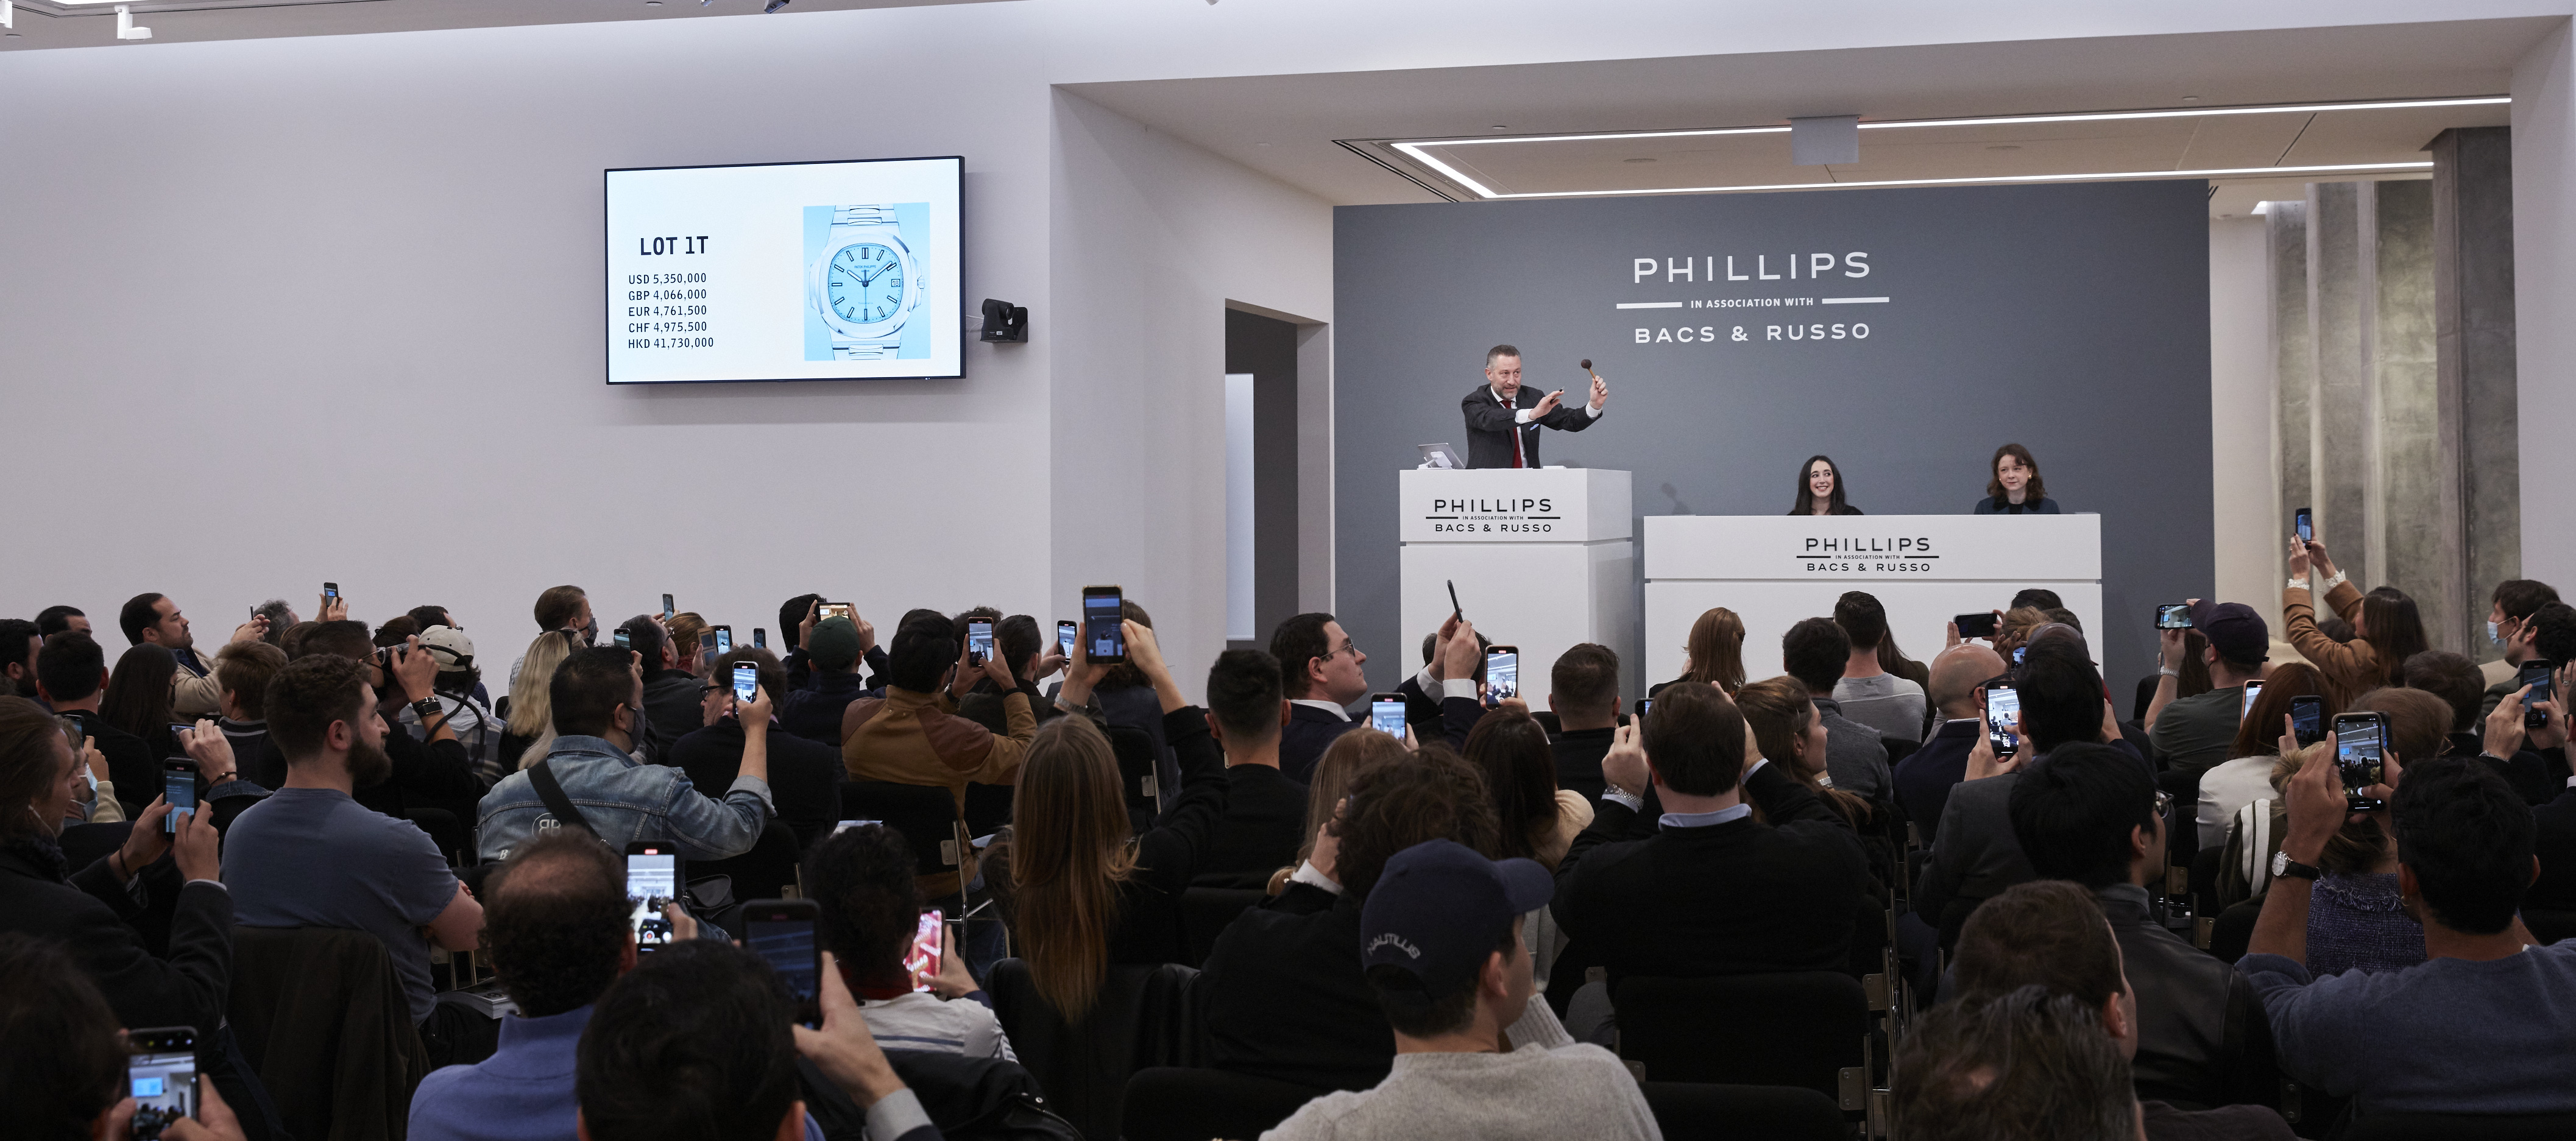 Phillips Sold 100% of the Watch Lots It Put Up for Auction in 2021